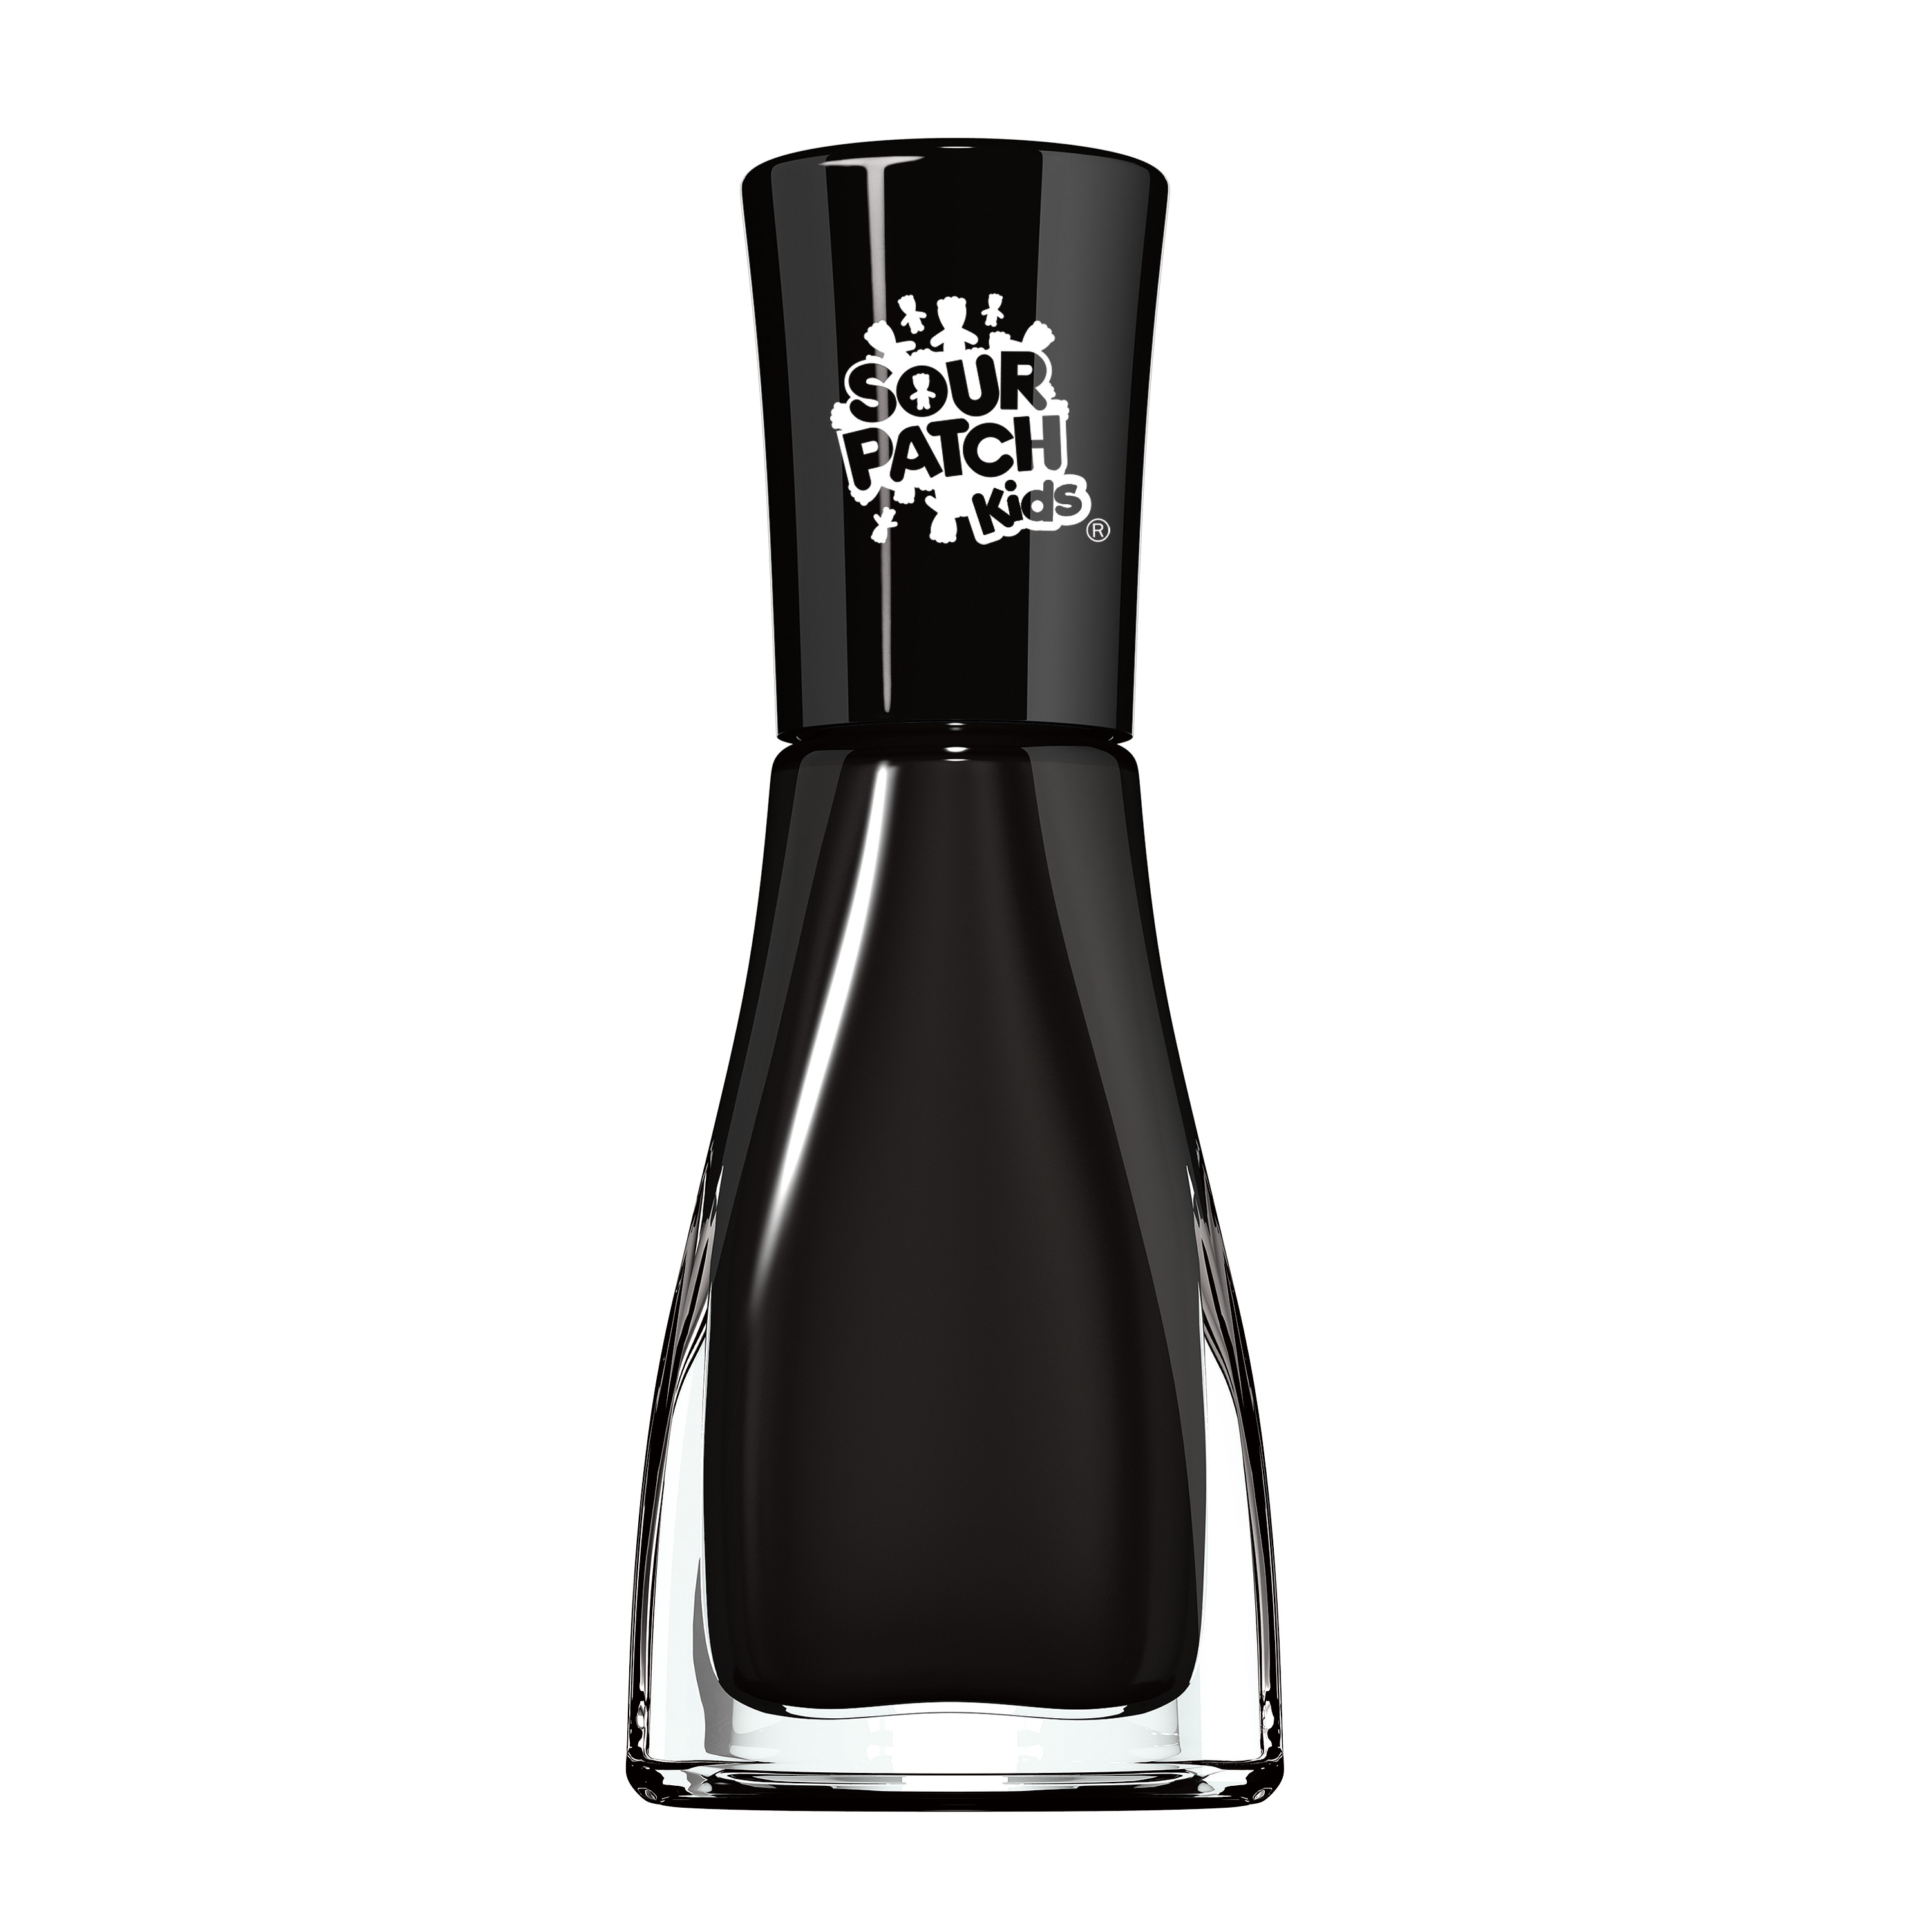 Sally Hansen Insta-Dri Nail Color x Sour Patch Kids, Ghouls Night Out, 0.31 oz - image 2 of 4